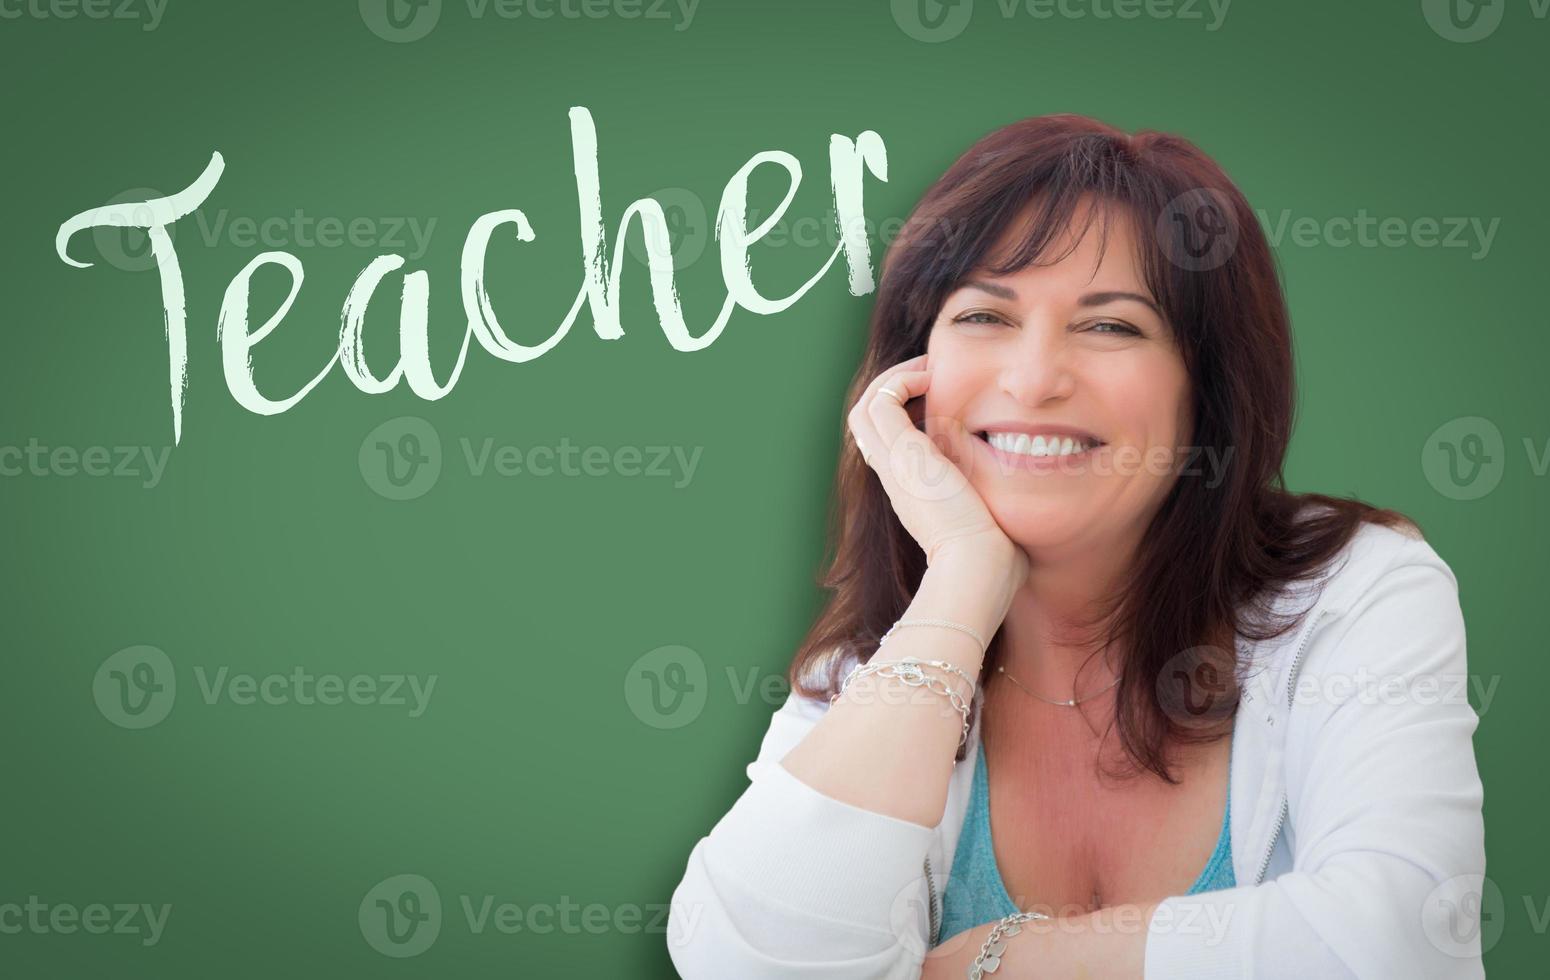 Teacher Written On Green Chalkboard Behind Smiling Middle Aged Woman photo